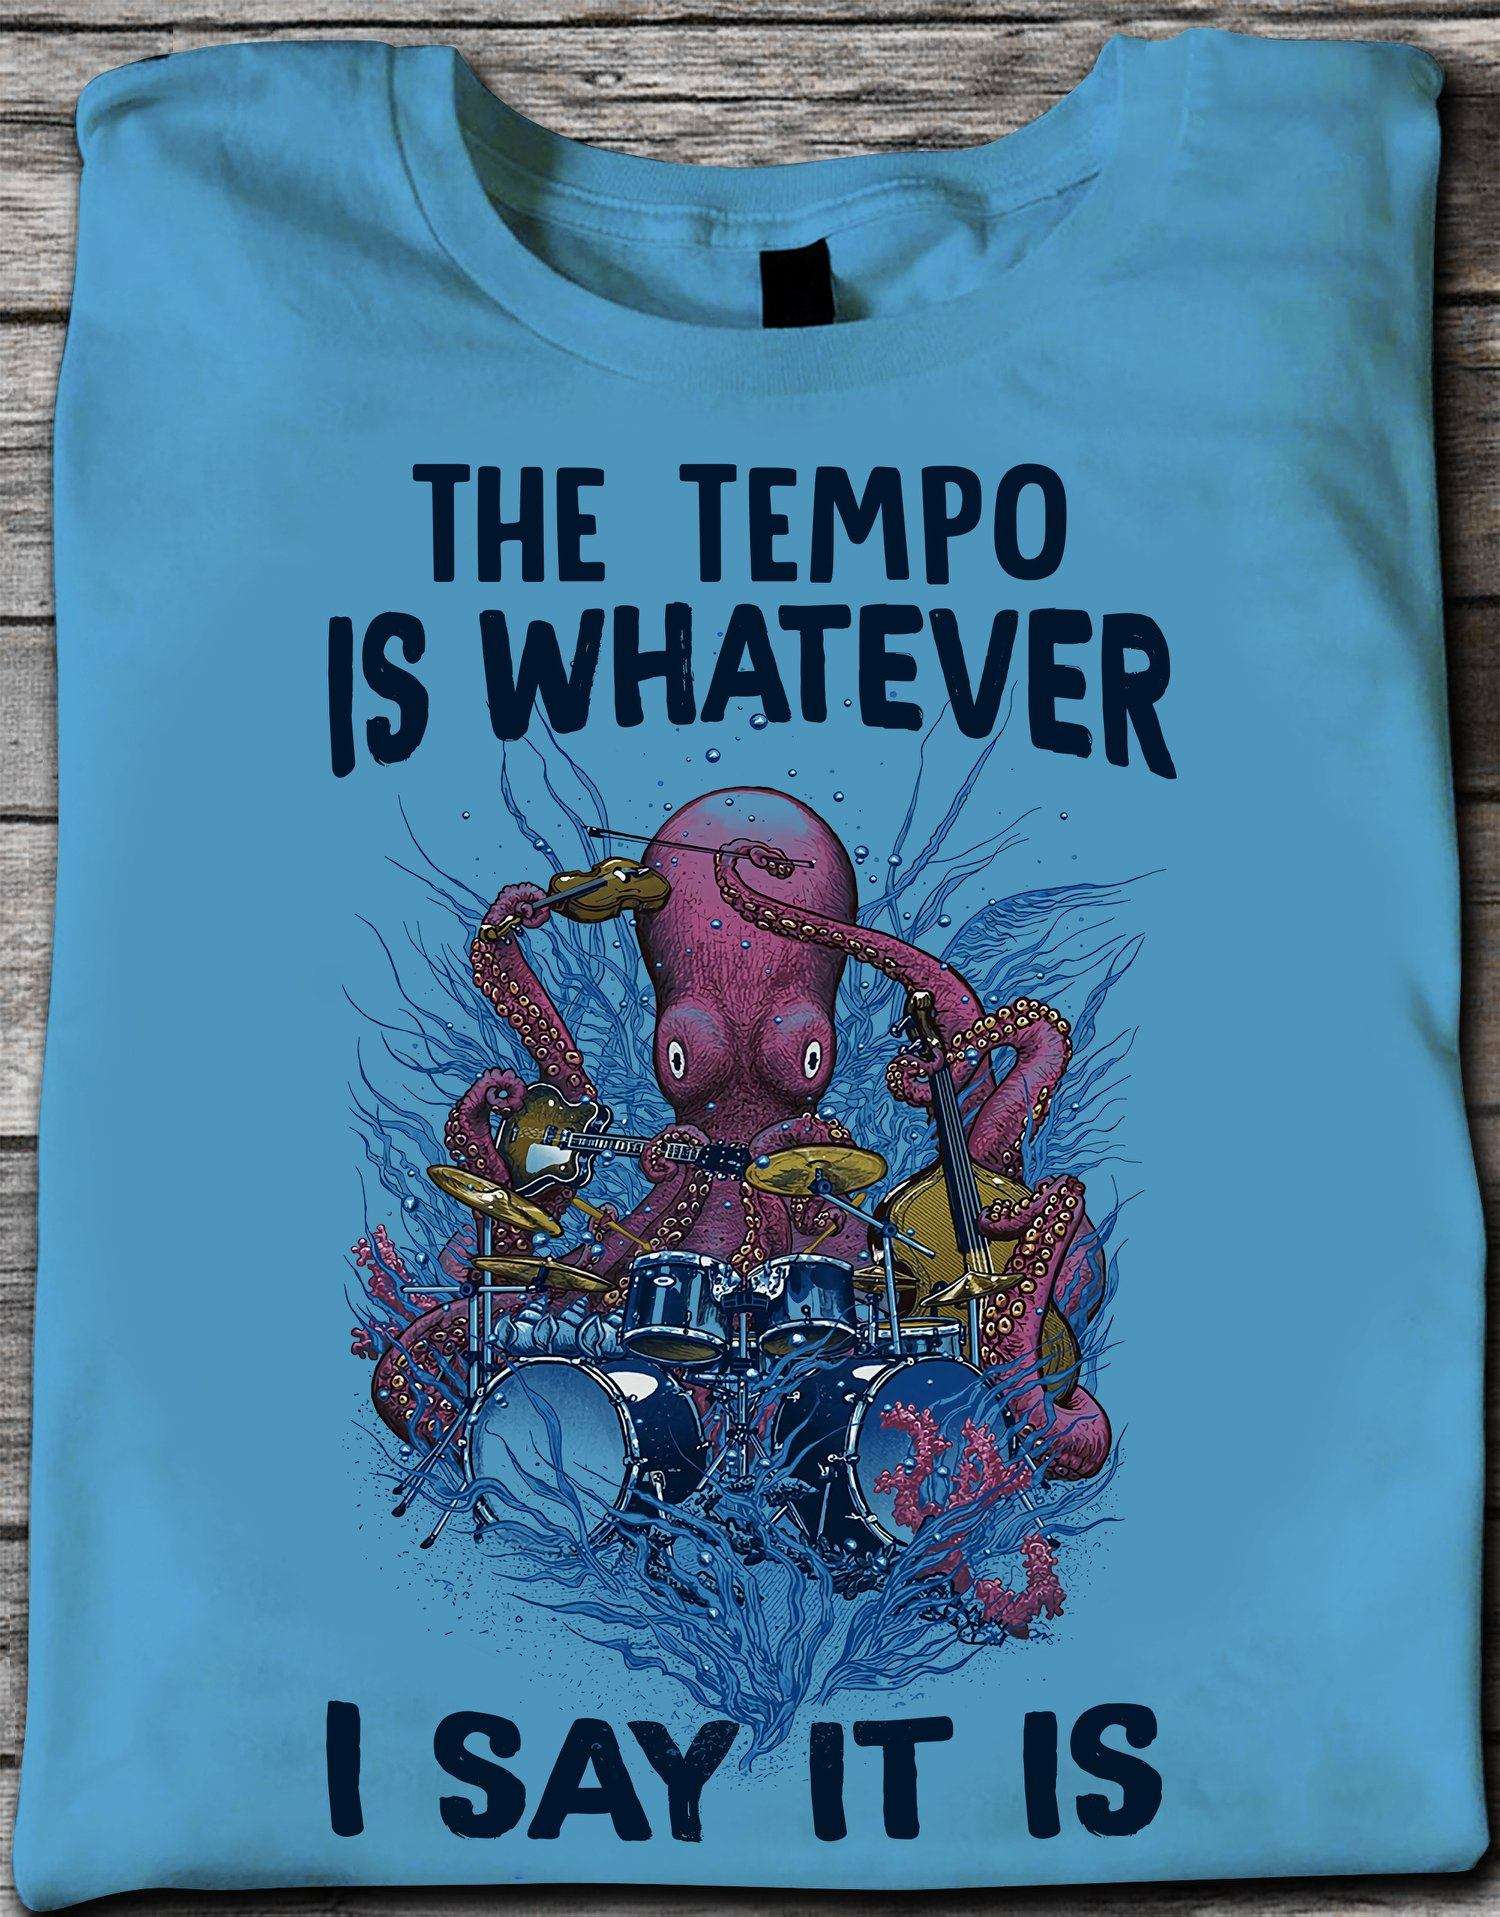 Octopus Drummer - The tempo is whatever i say it is